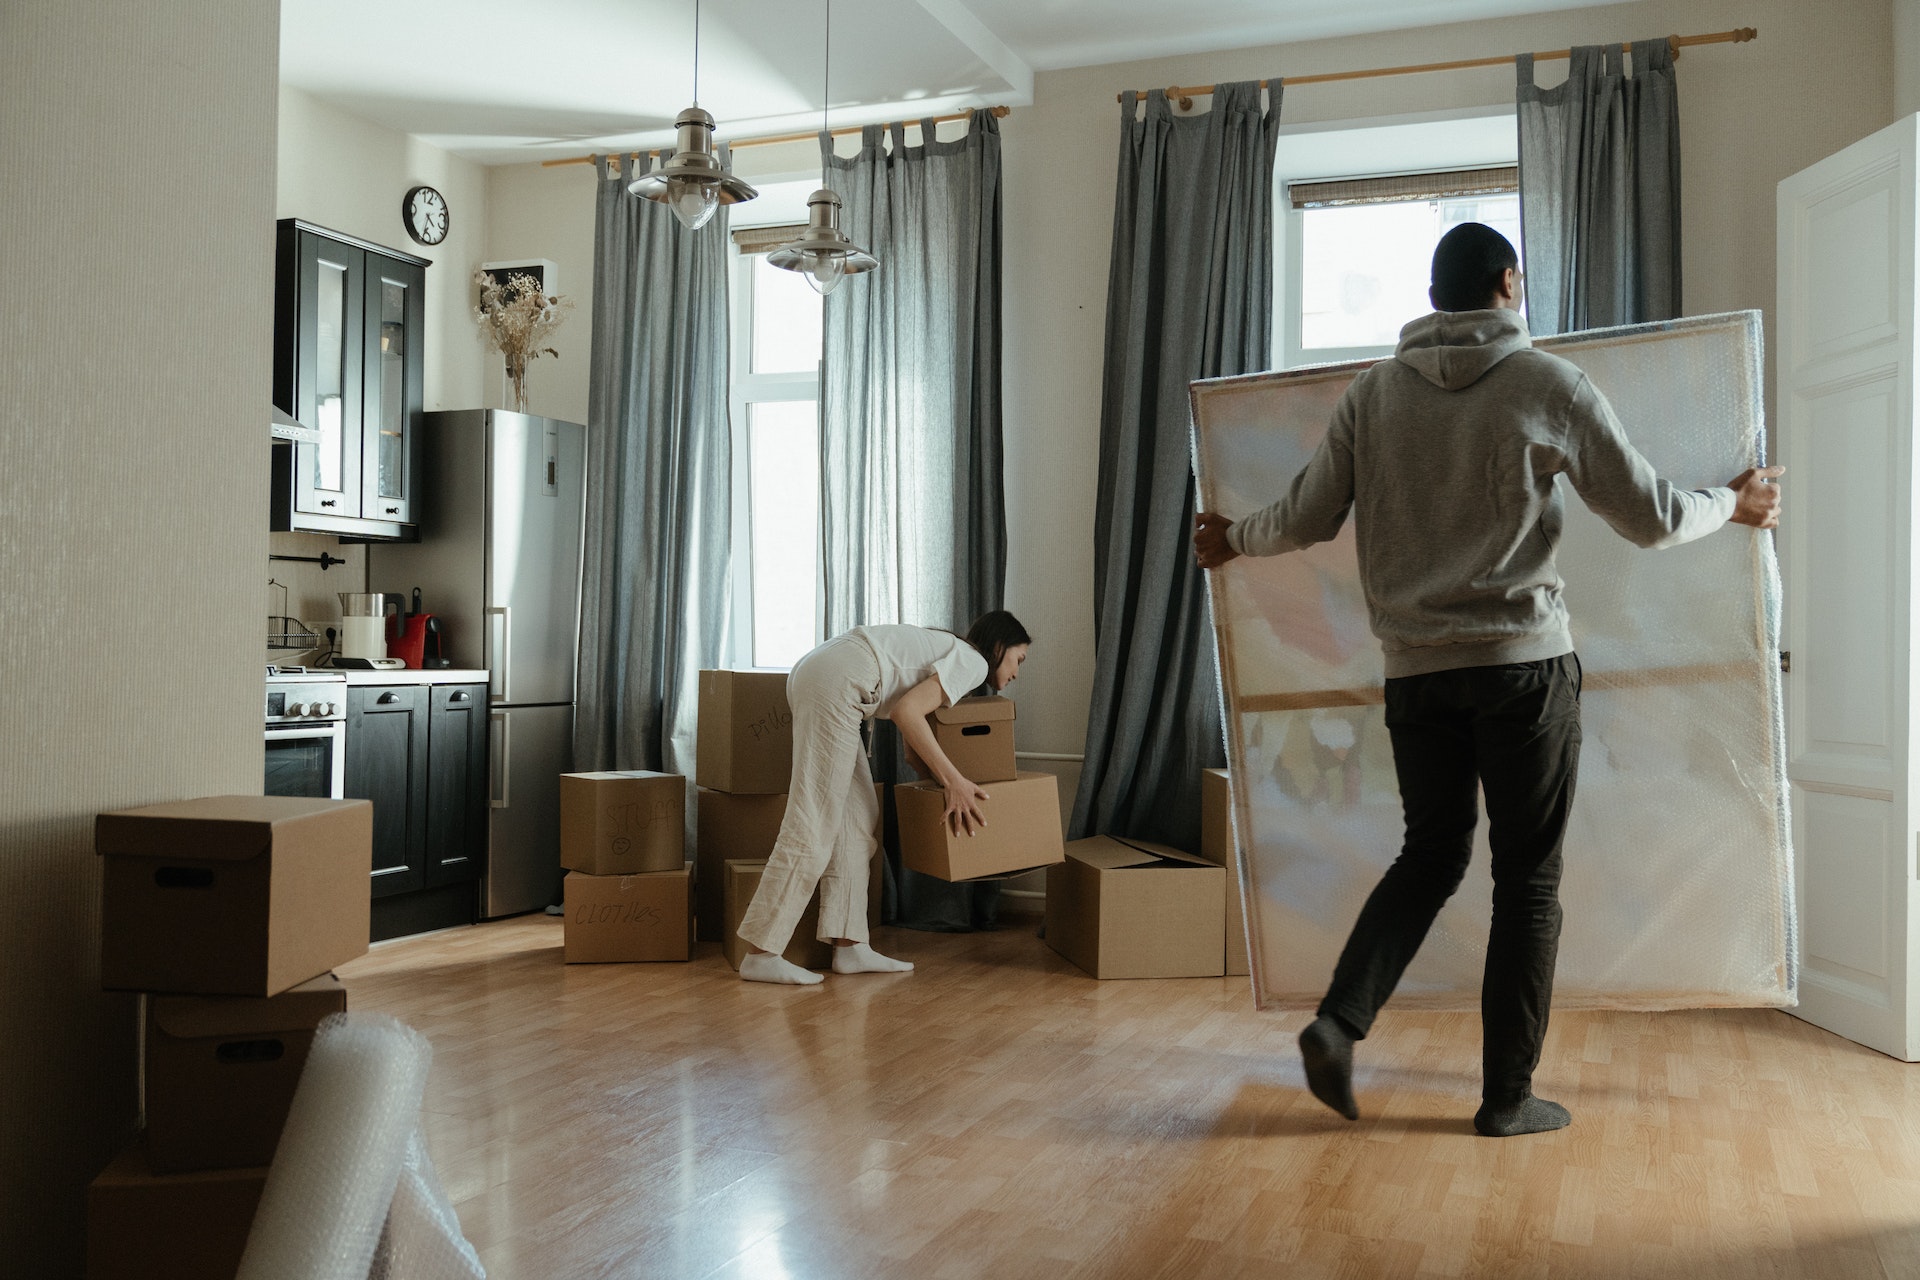 5 Important Things to Look for in a New Home